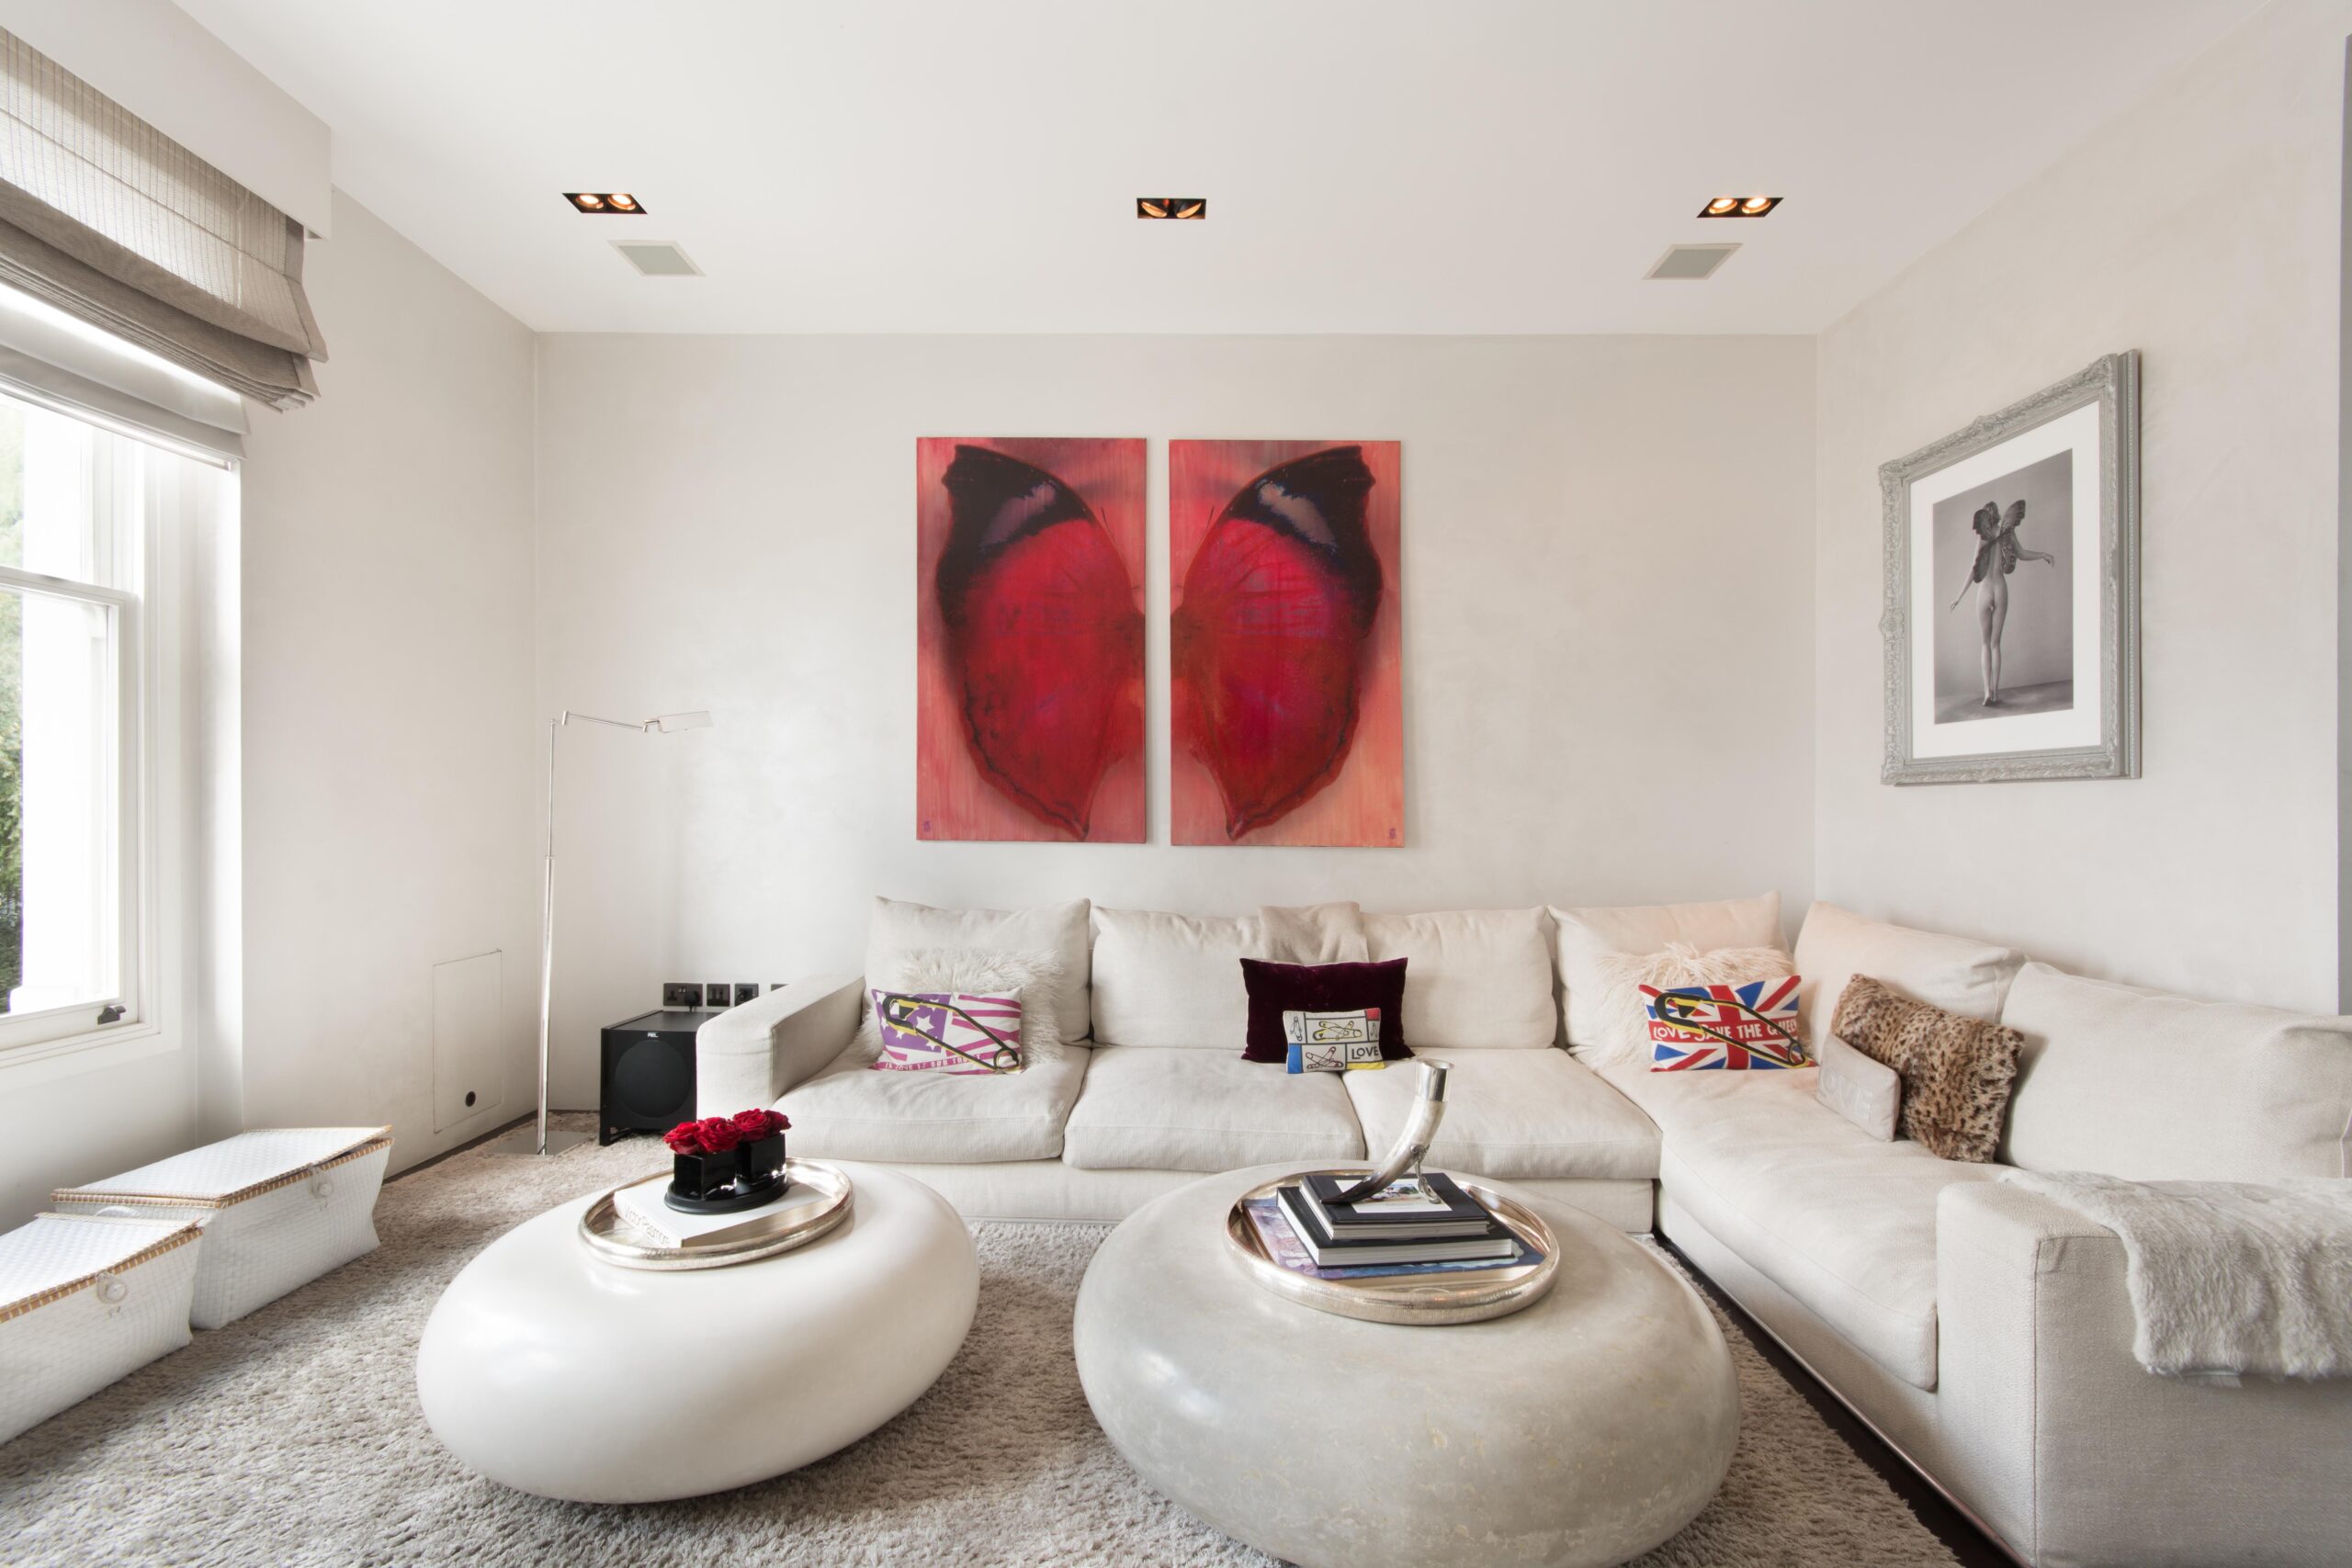 For Sale: Westbourne Grove Notting Hill W11 minimalist reception room with contemporary artwork